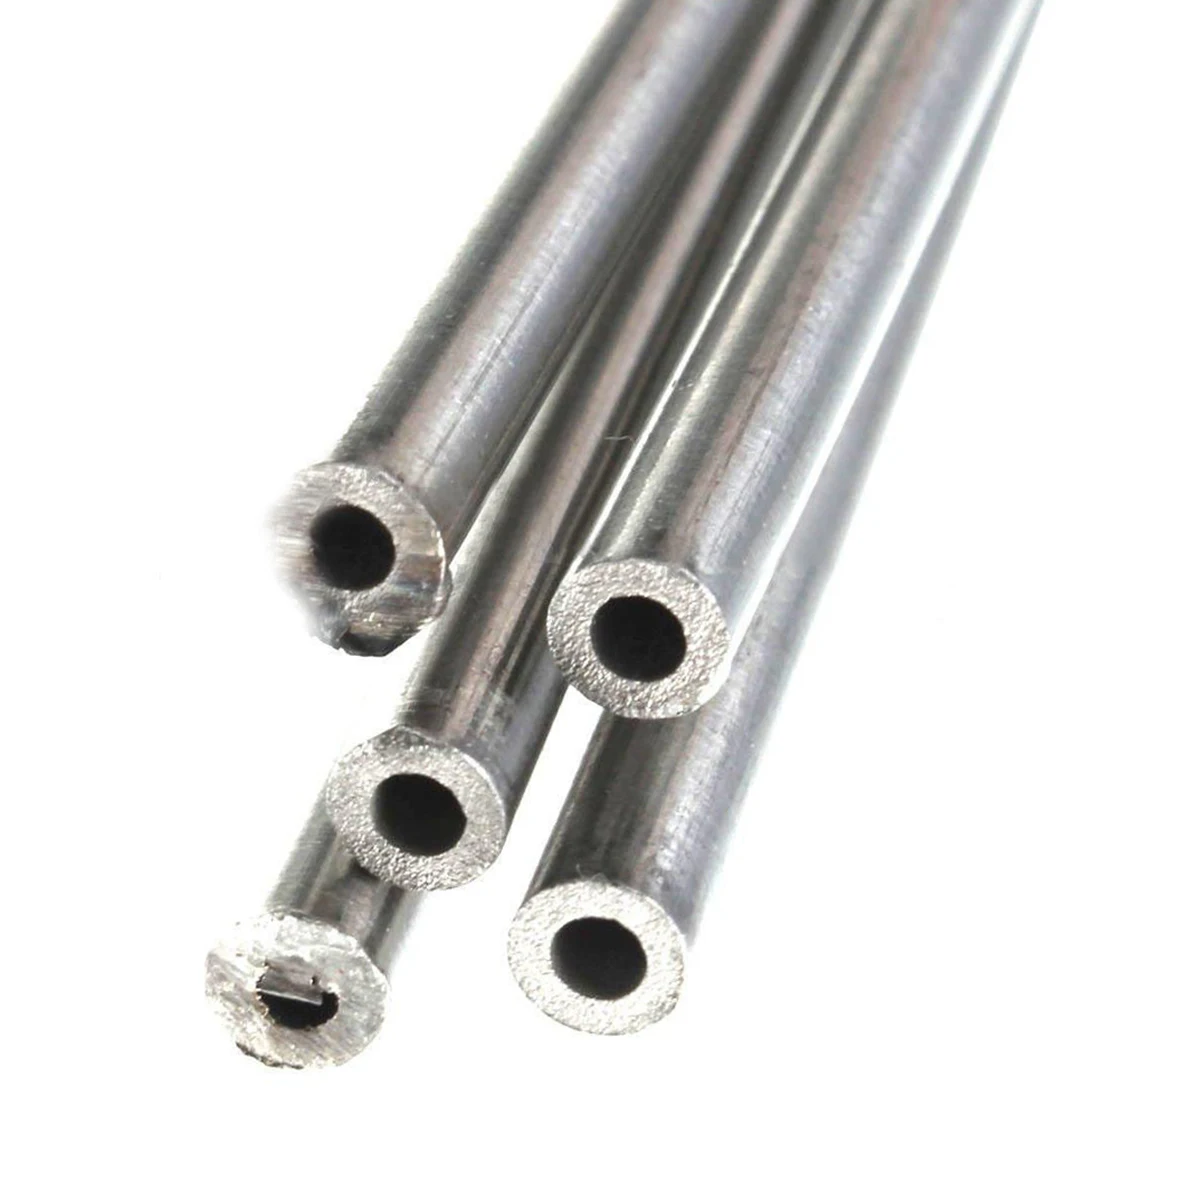 Length 250mm Tool Supplies# 304 Stainless Steel Capillary Tube OD 10mm x 8mm ID 